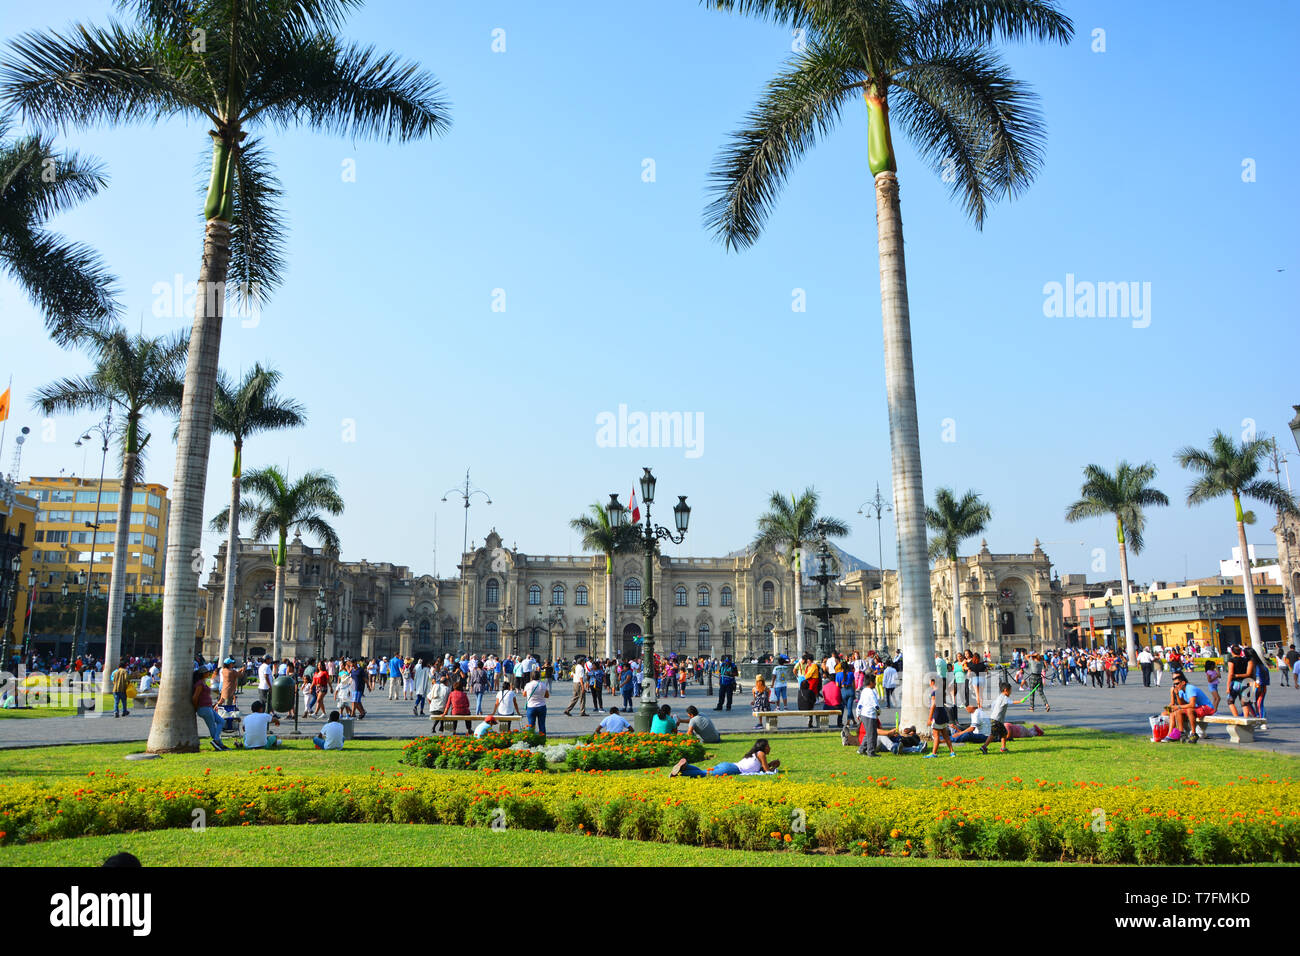 Lima Peru with al his old Spanish colonial buildings and the Plaza de armas with the government palace Stock Photo